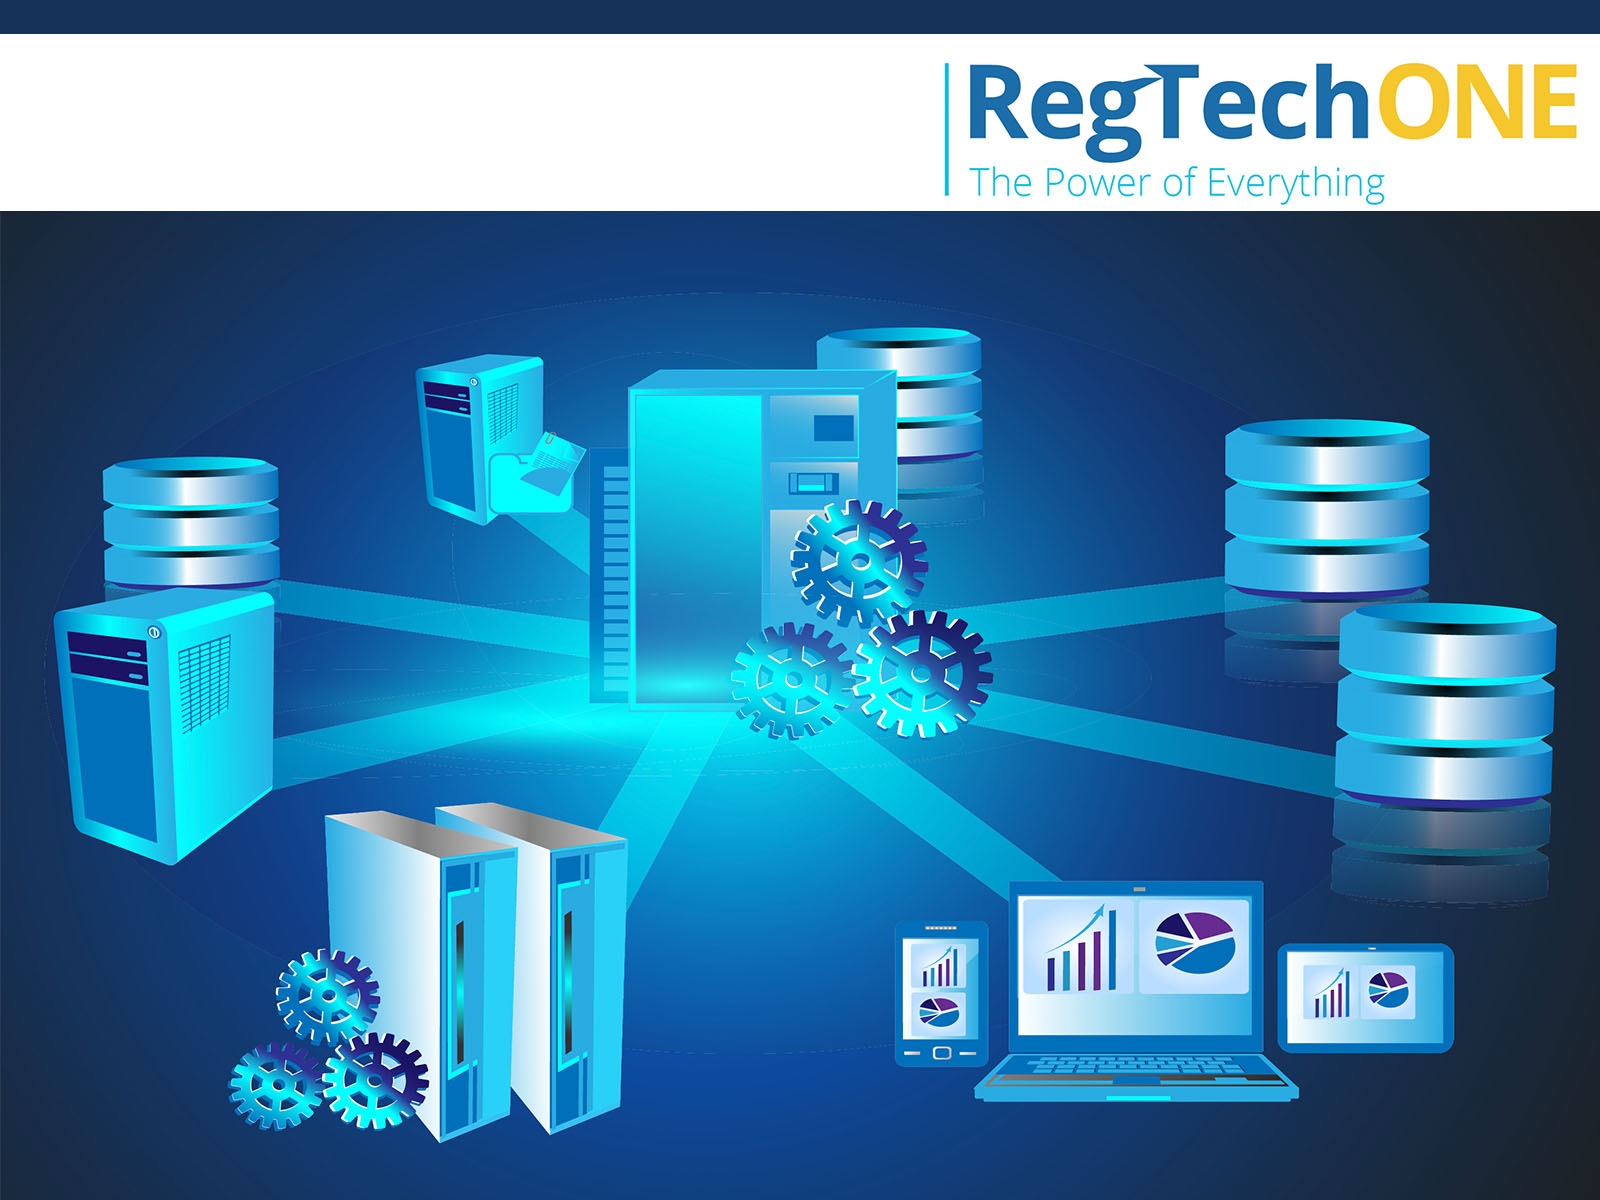 This art is intended to illustrated the concept of hub-and-spoke centralized control for KYC and AML. Centralized control is made possible on the RegTechONE platform for AML software and KYC software. The art is in tones of blue, and it shows a server and gears in the center with spokes out to computers, servers, laptops, etc.